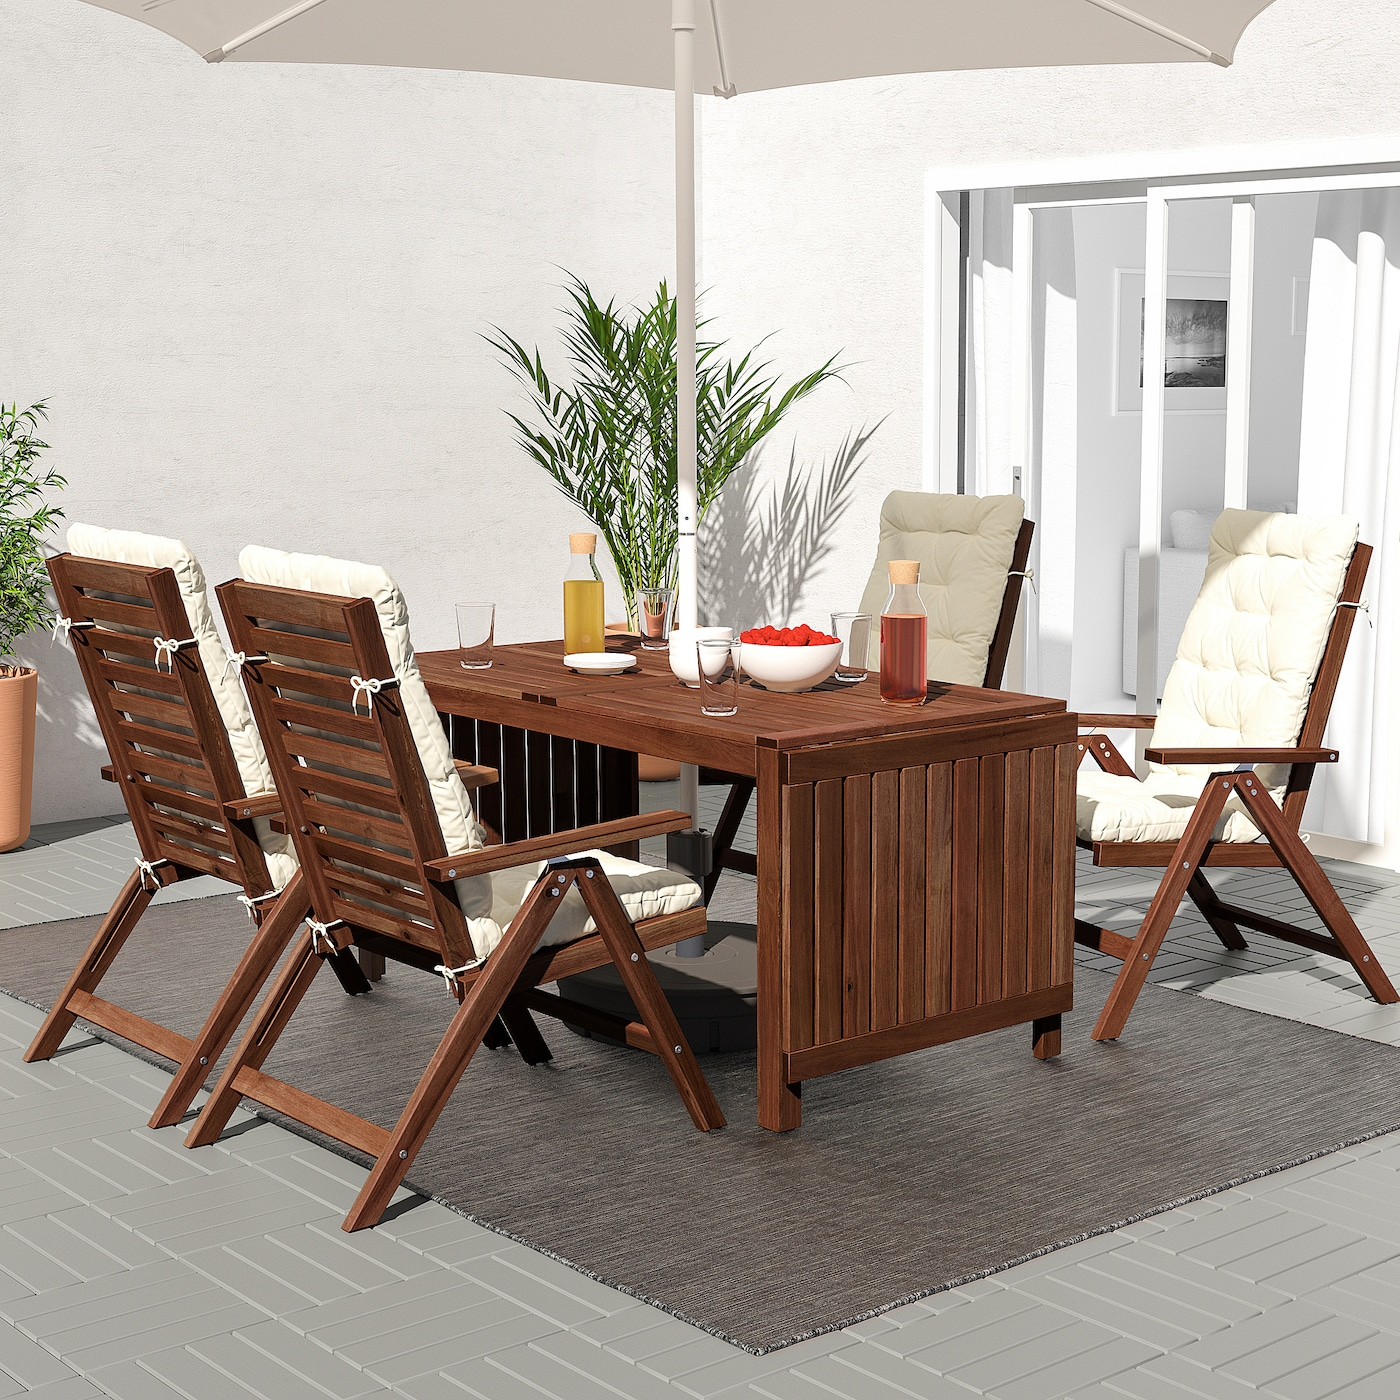 Pplar Reclining Chair Outdoor Brown Foldable Brown Stained Brown throughout measurements 1400 X 1400